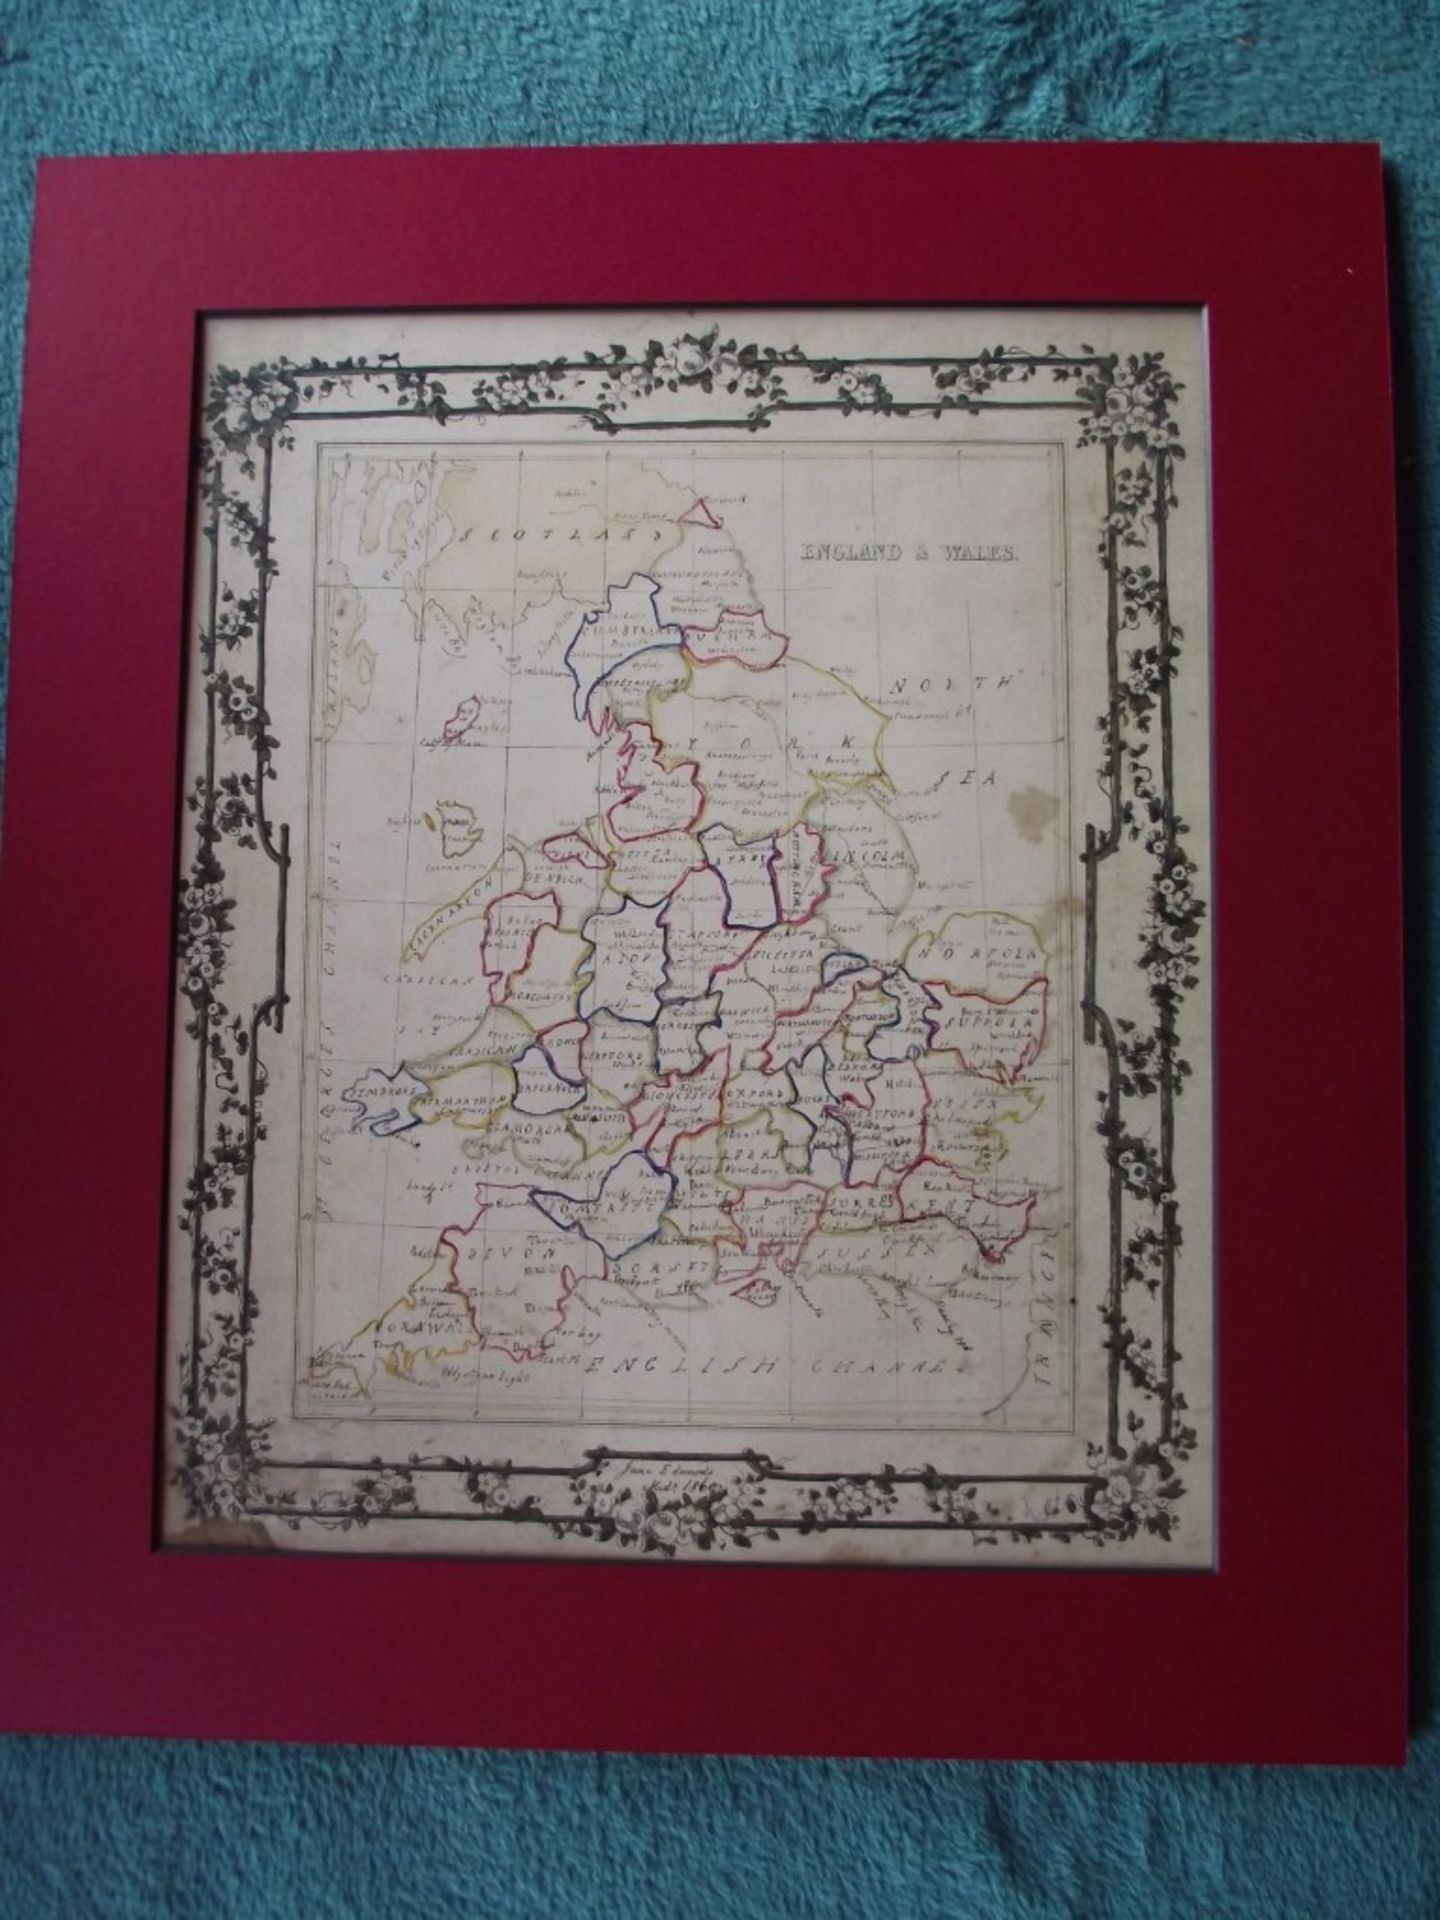 2 x 19th Century Hand Drawn Maps - Signed & Dated By Jane Edwards 1860 - Image 2 of 34